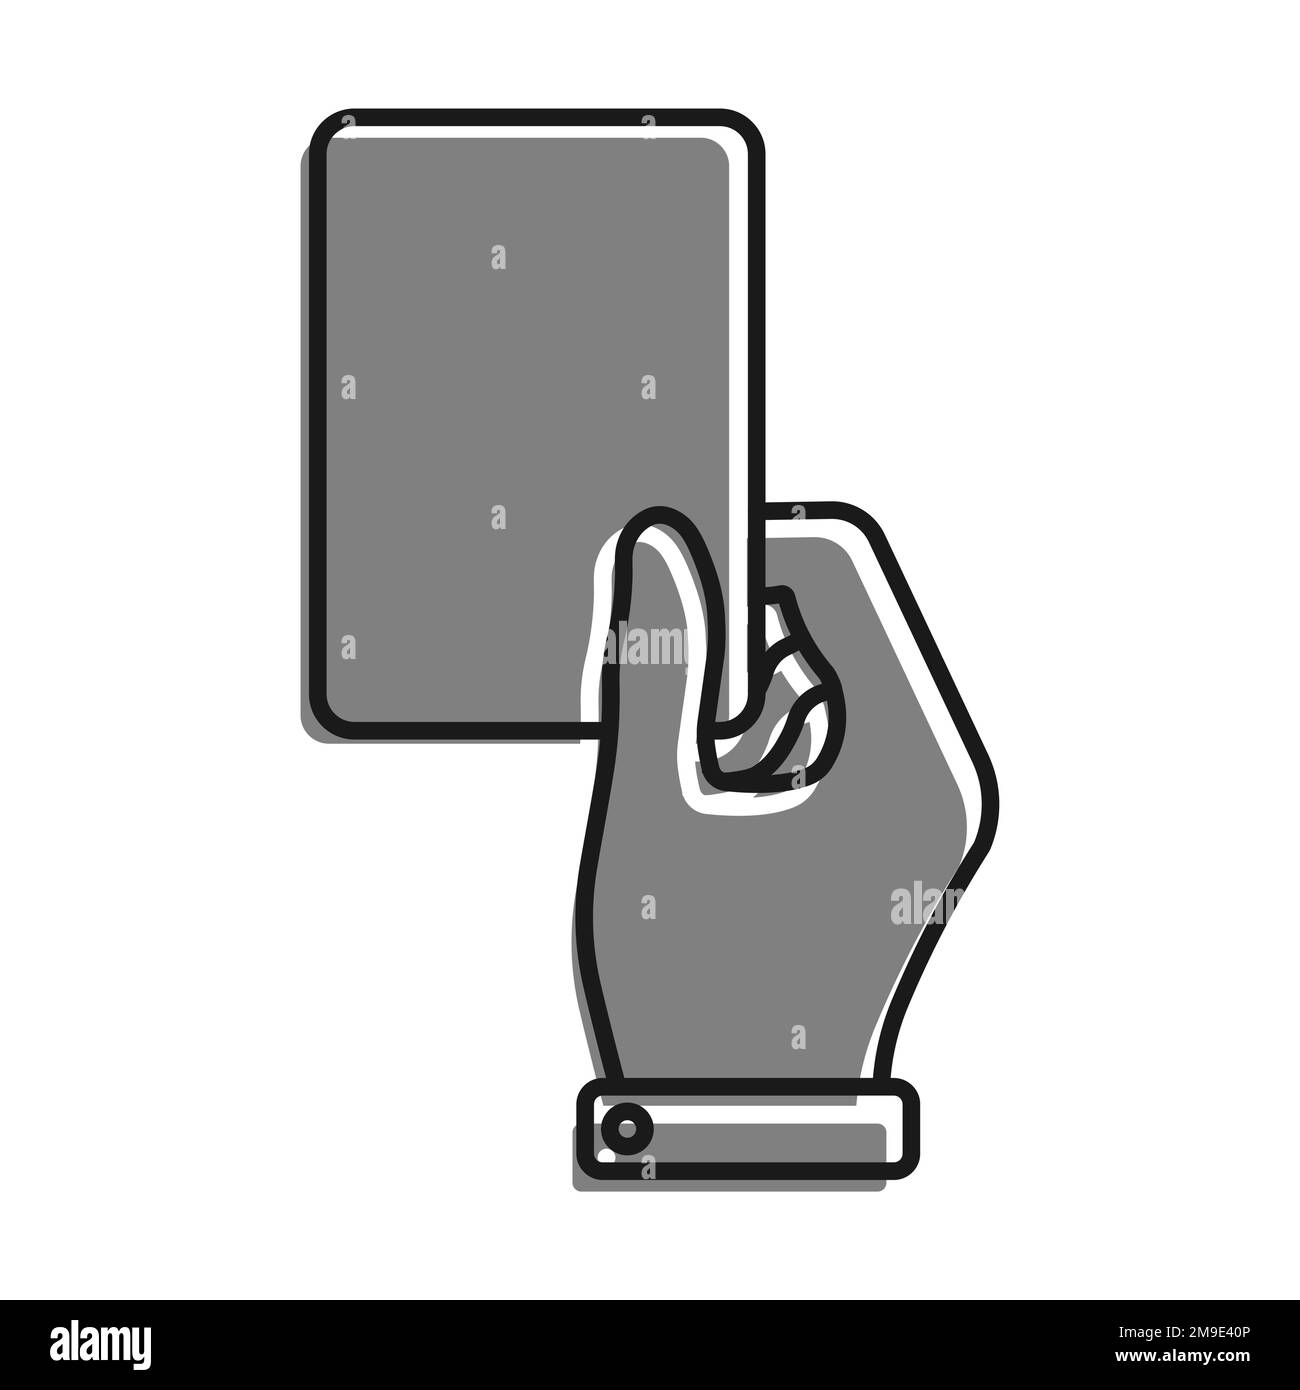 Linear filled with gray color icon. Sports Referee Hand Showing Card For Player Breaking Rules. Sports Team Game Of Soccer, Football. Simple black and Stock Vector